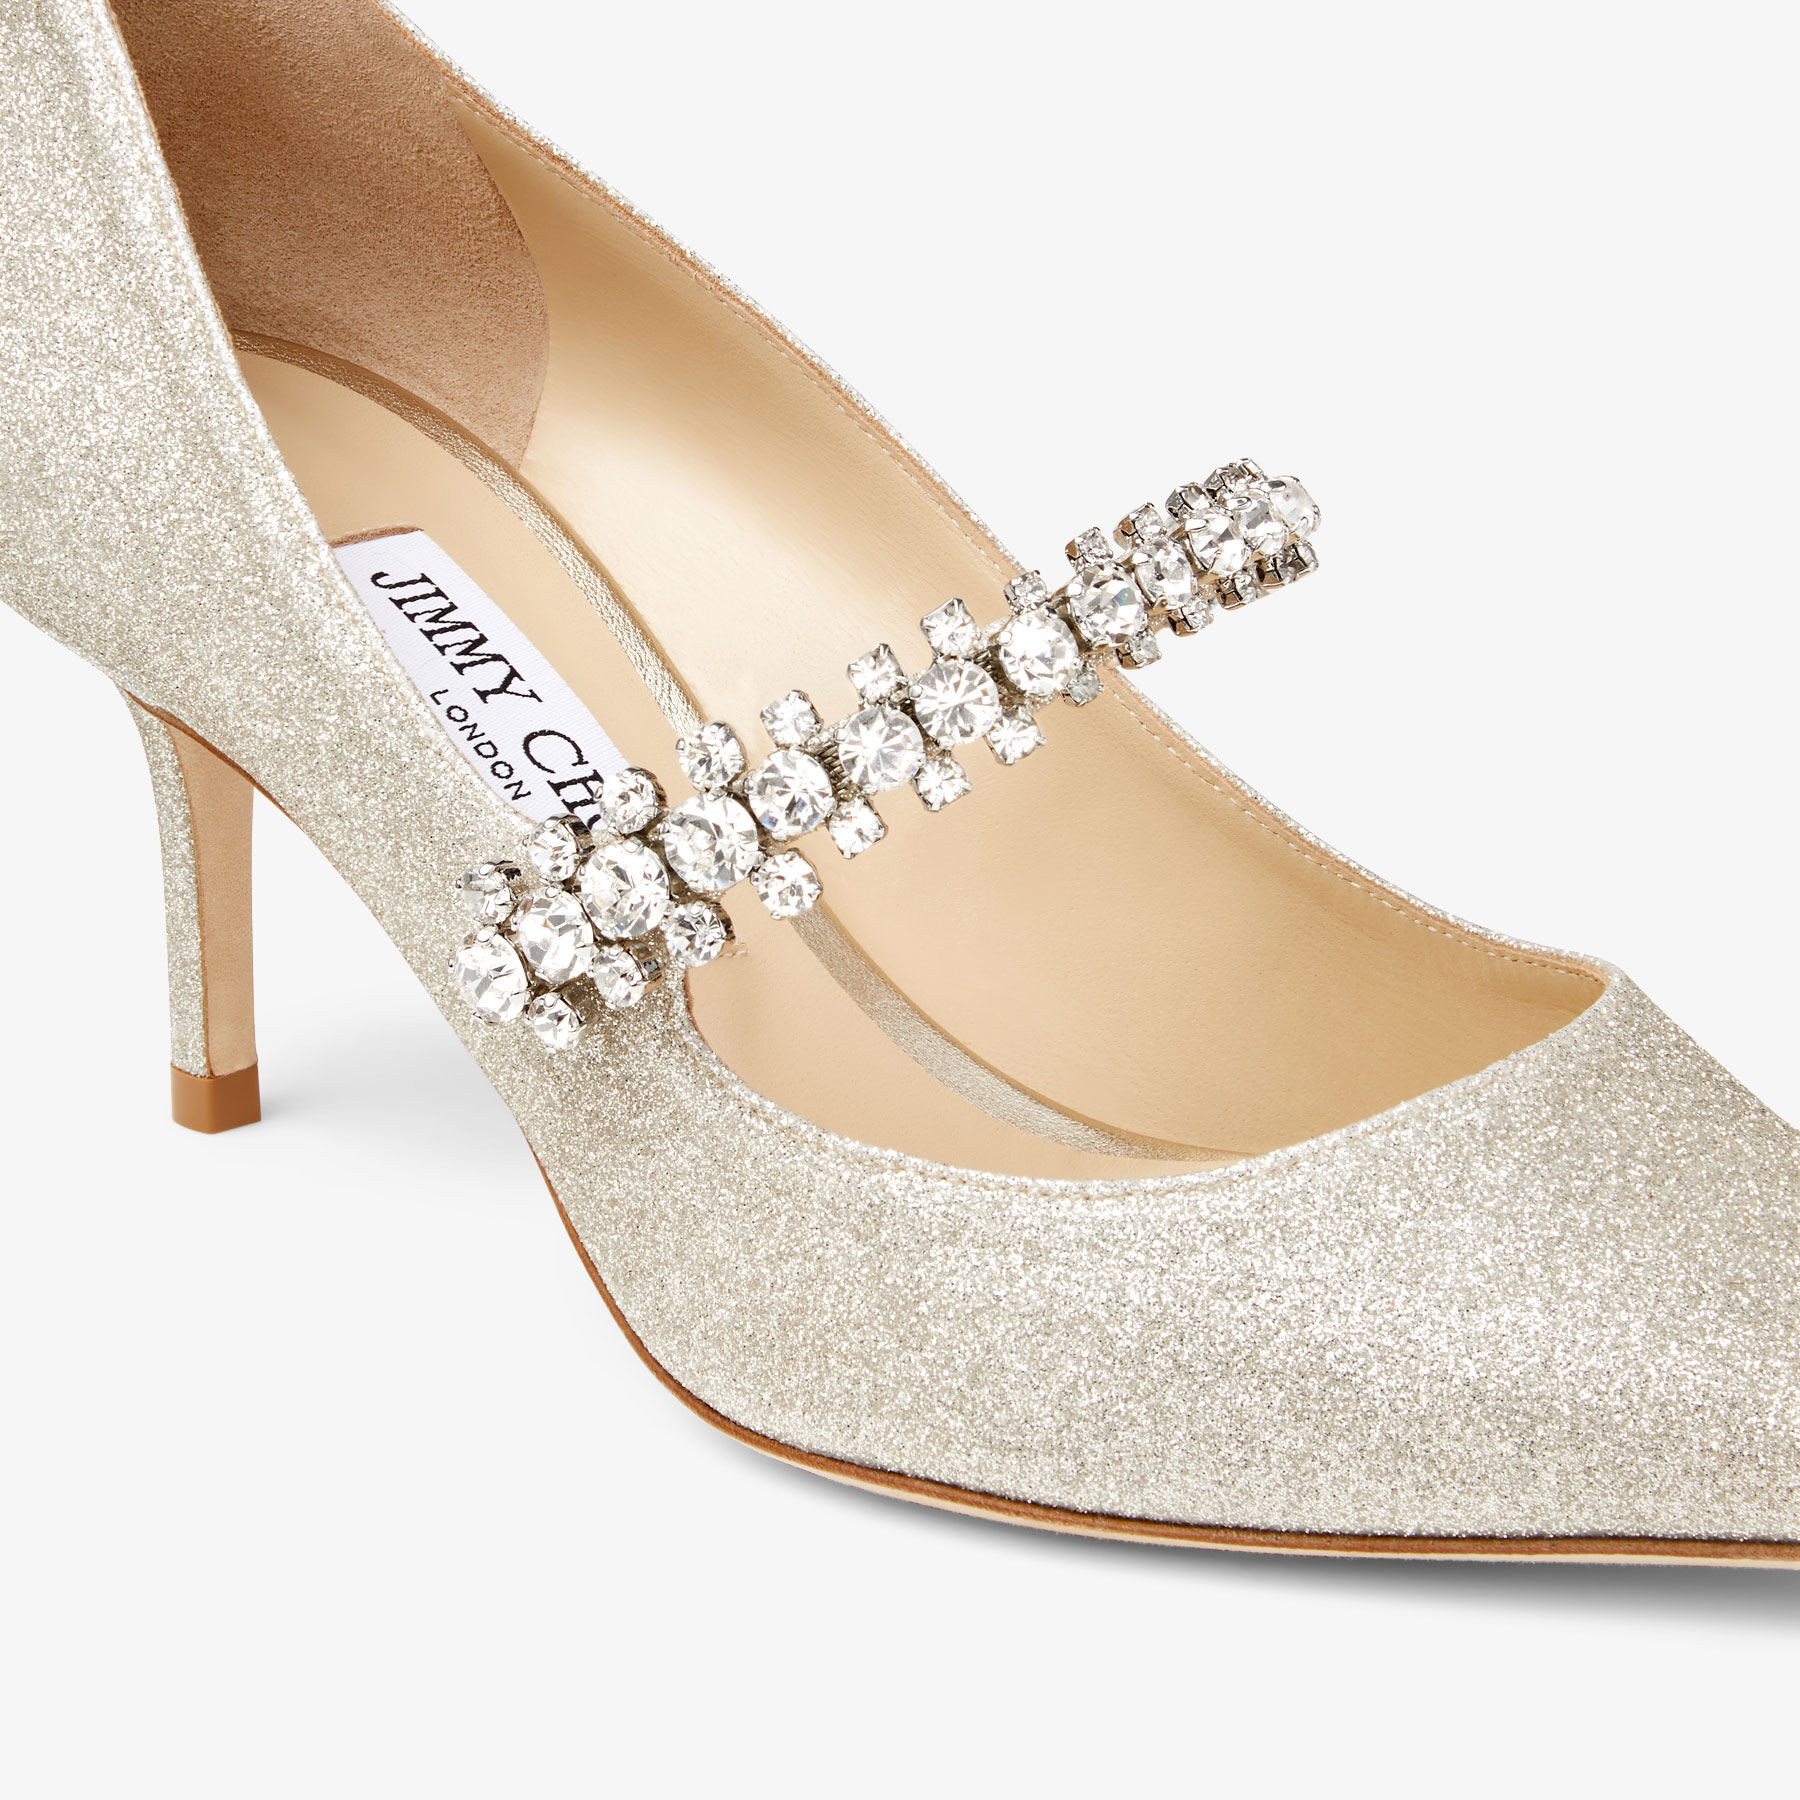 Bing Pump 65 | Platinum Ice Dusty Glitter Pumps with crystals 